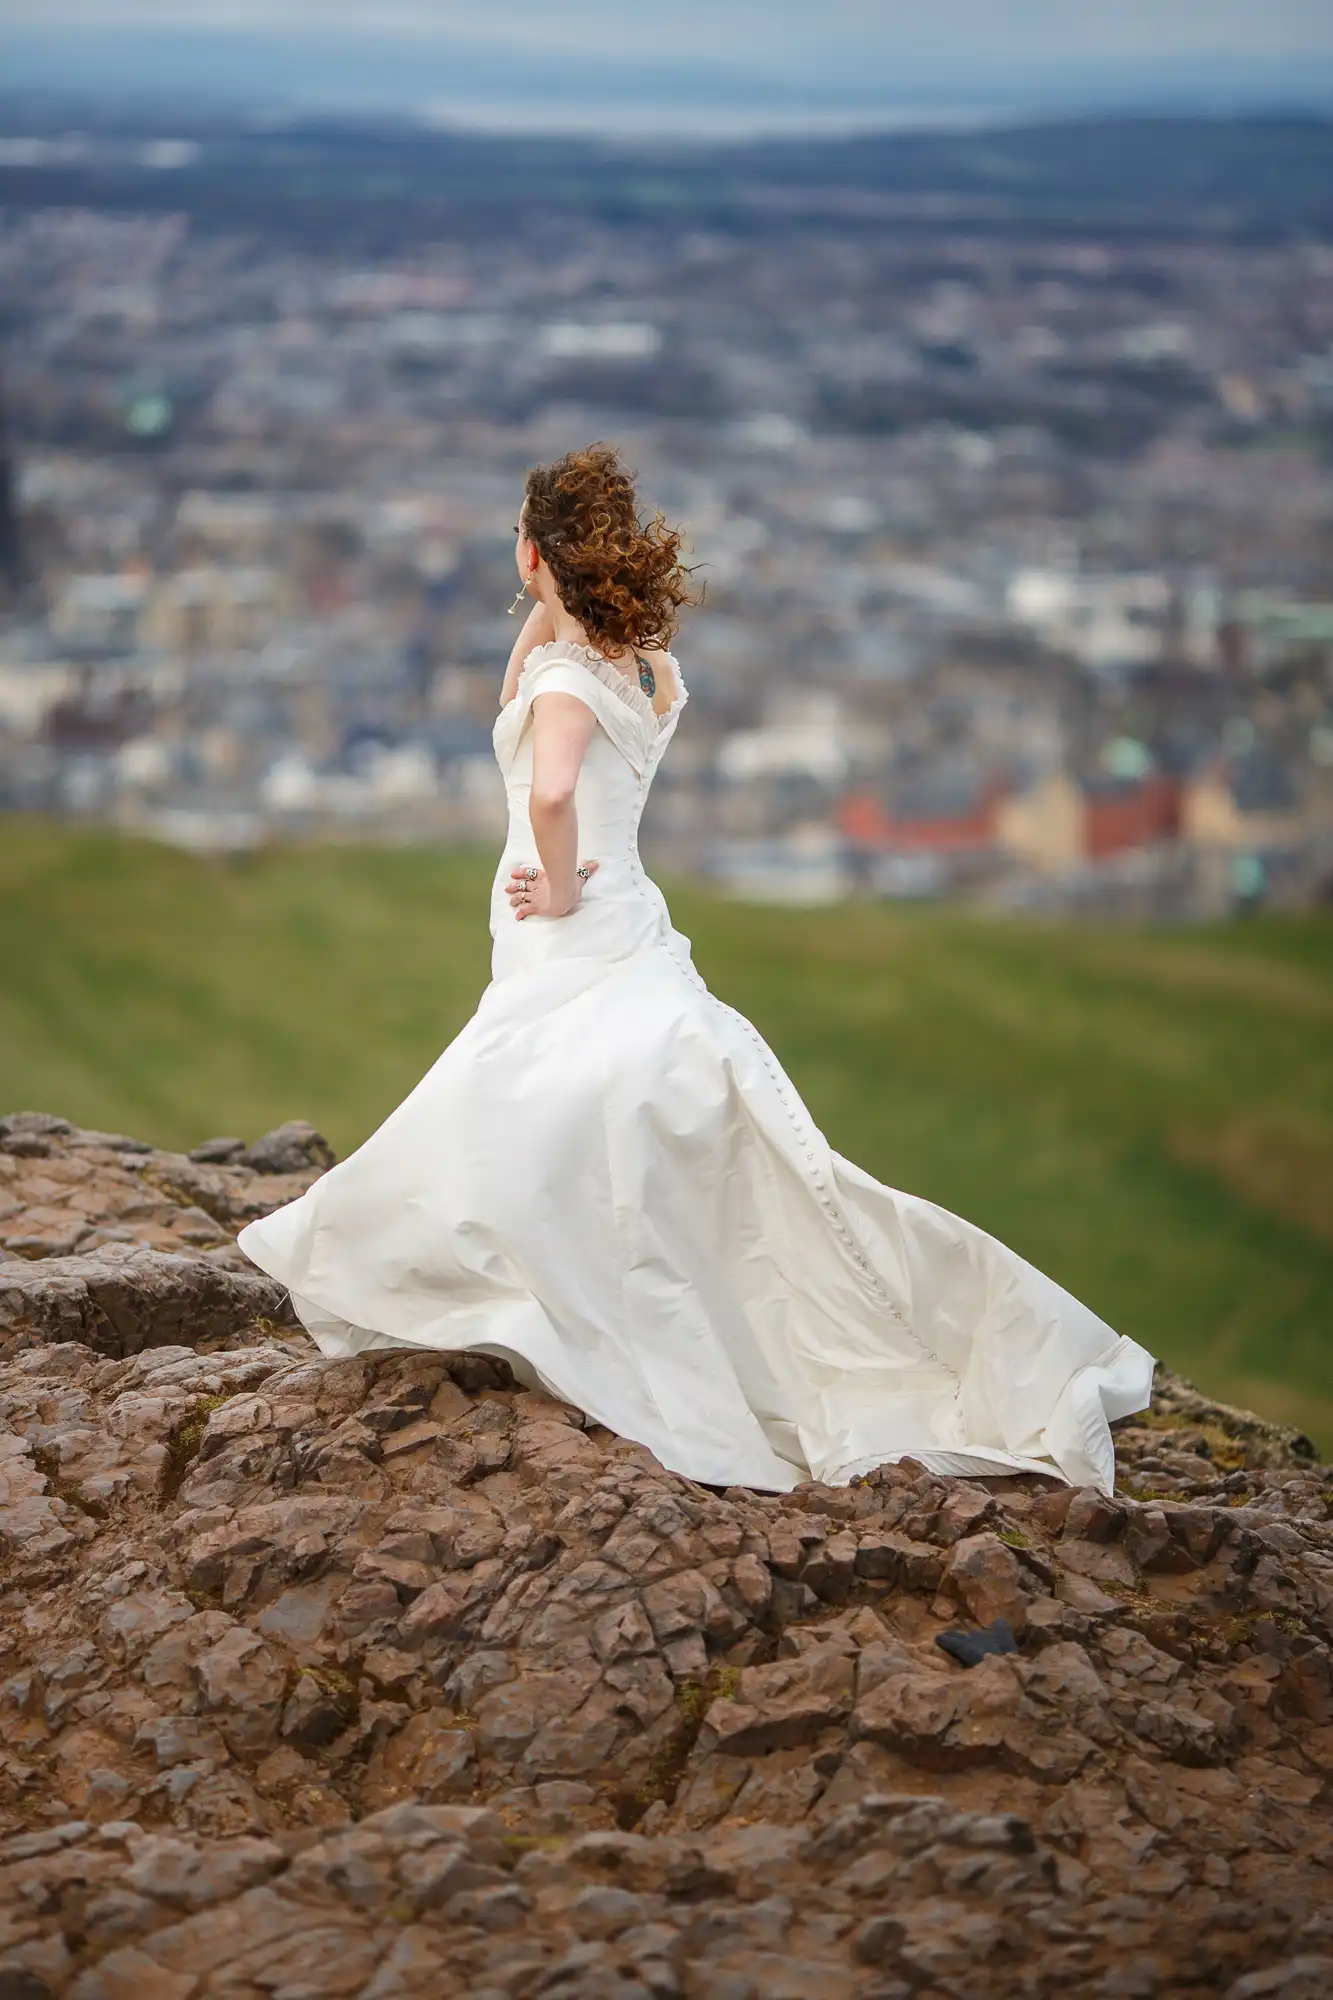 A woman in a white wedding dress stands on a rocky hilltop overlooking a cityscape, her curly hair blowing in the wind.